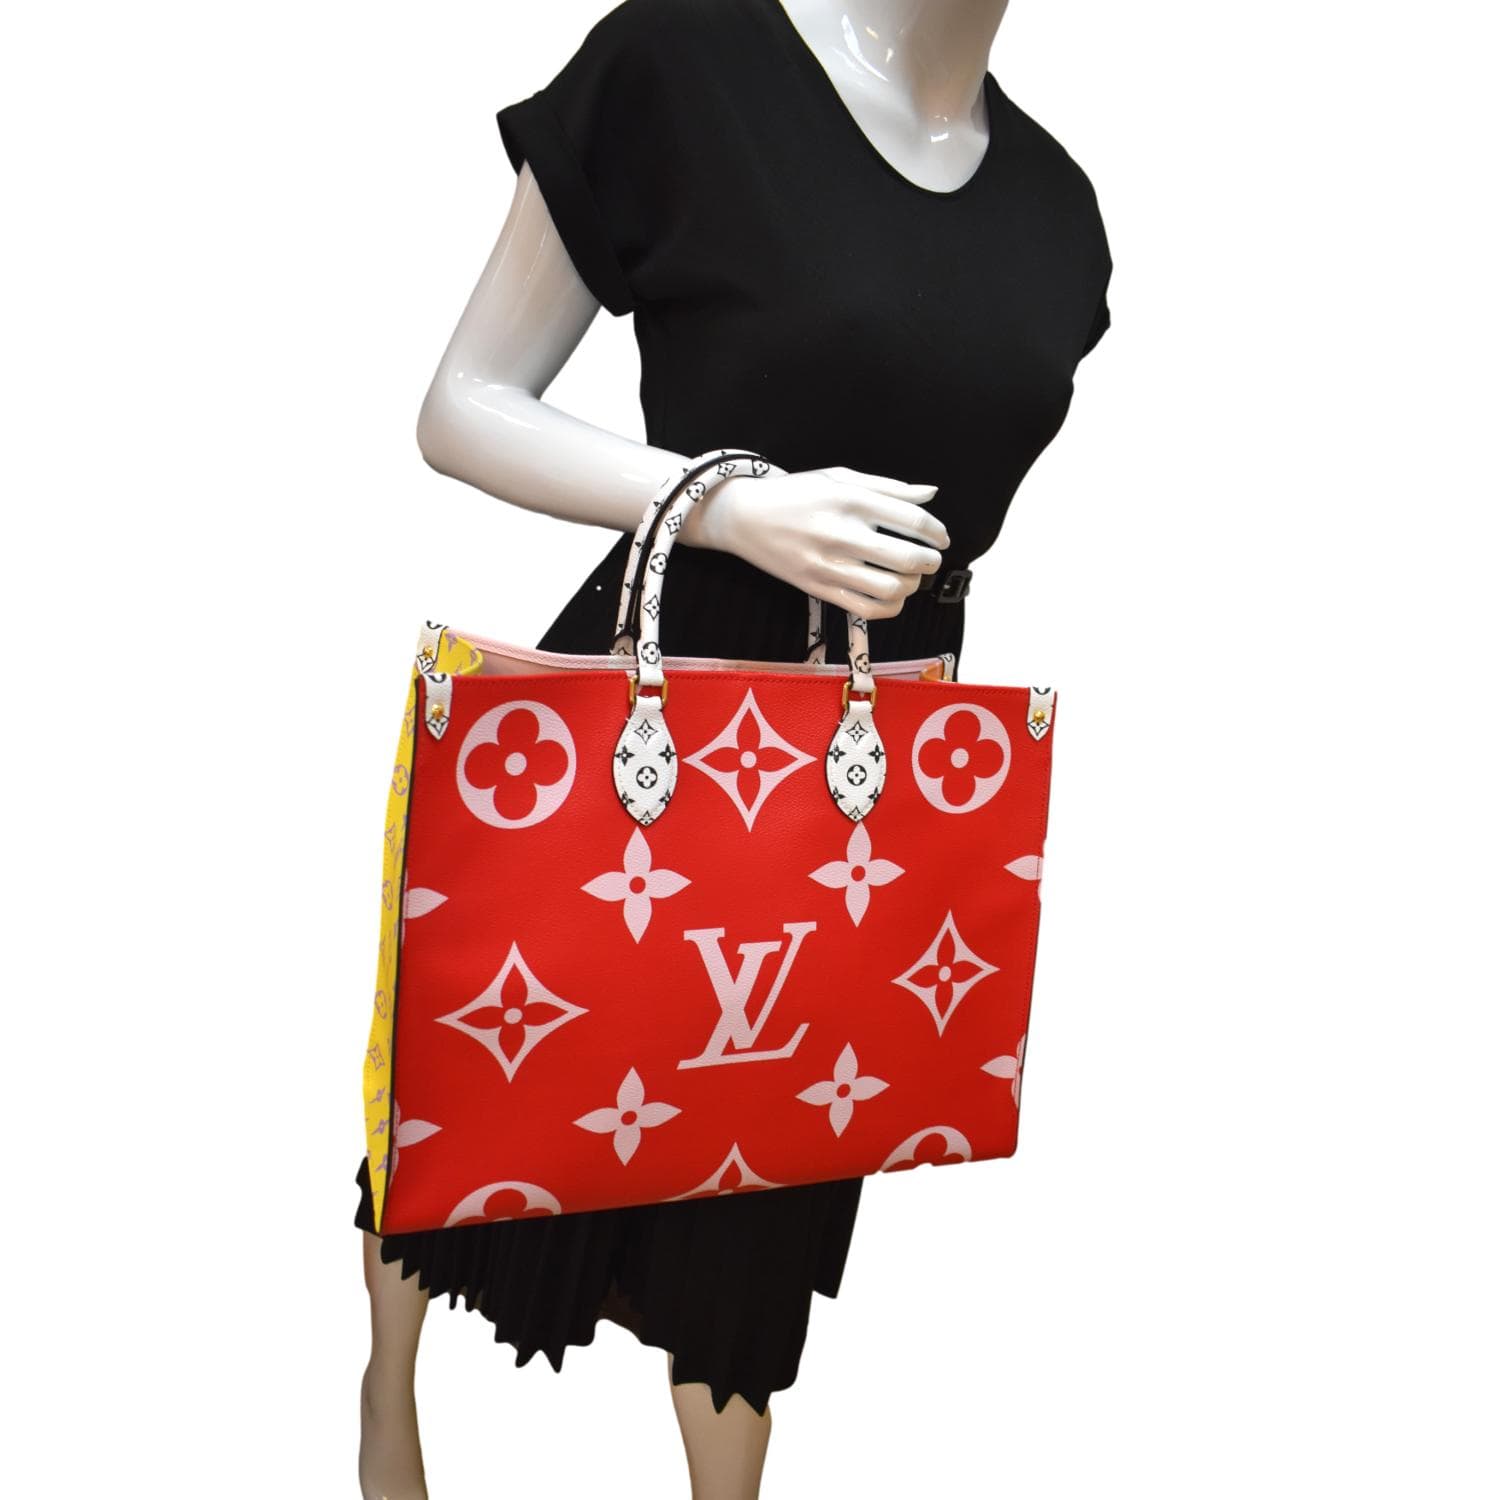 Louis Vuitton Launches New Versions of the On-Trend Onthego Tote Bag